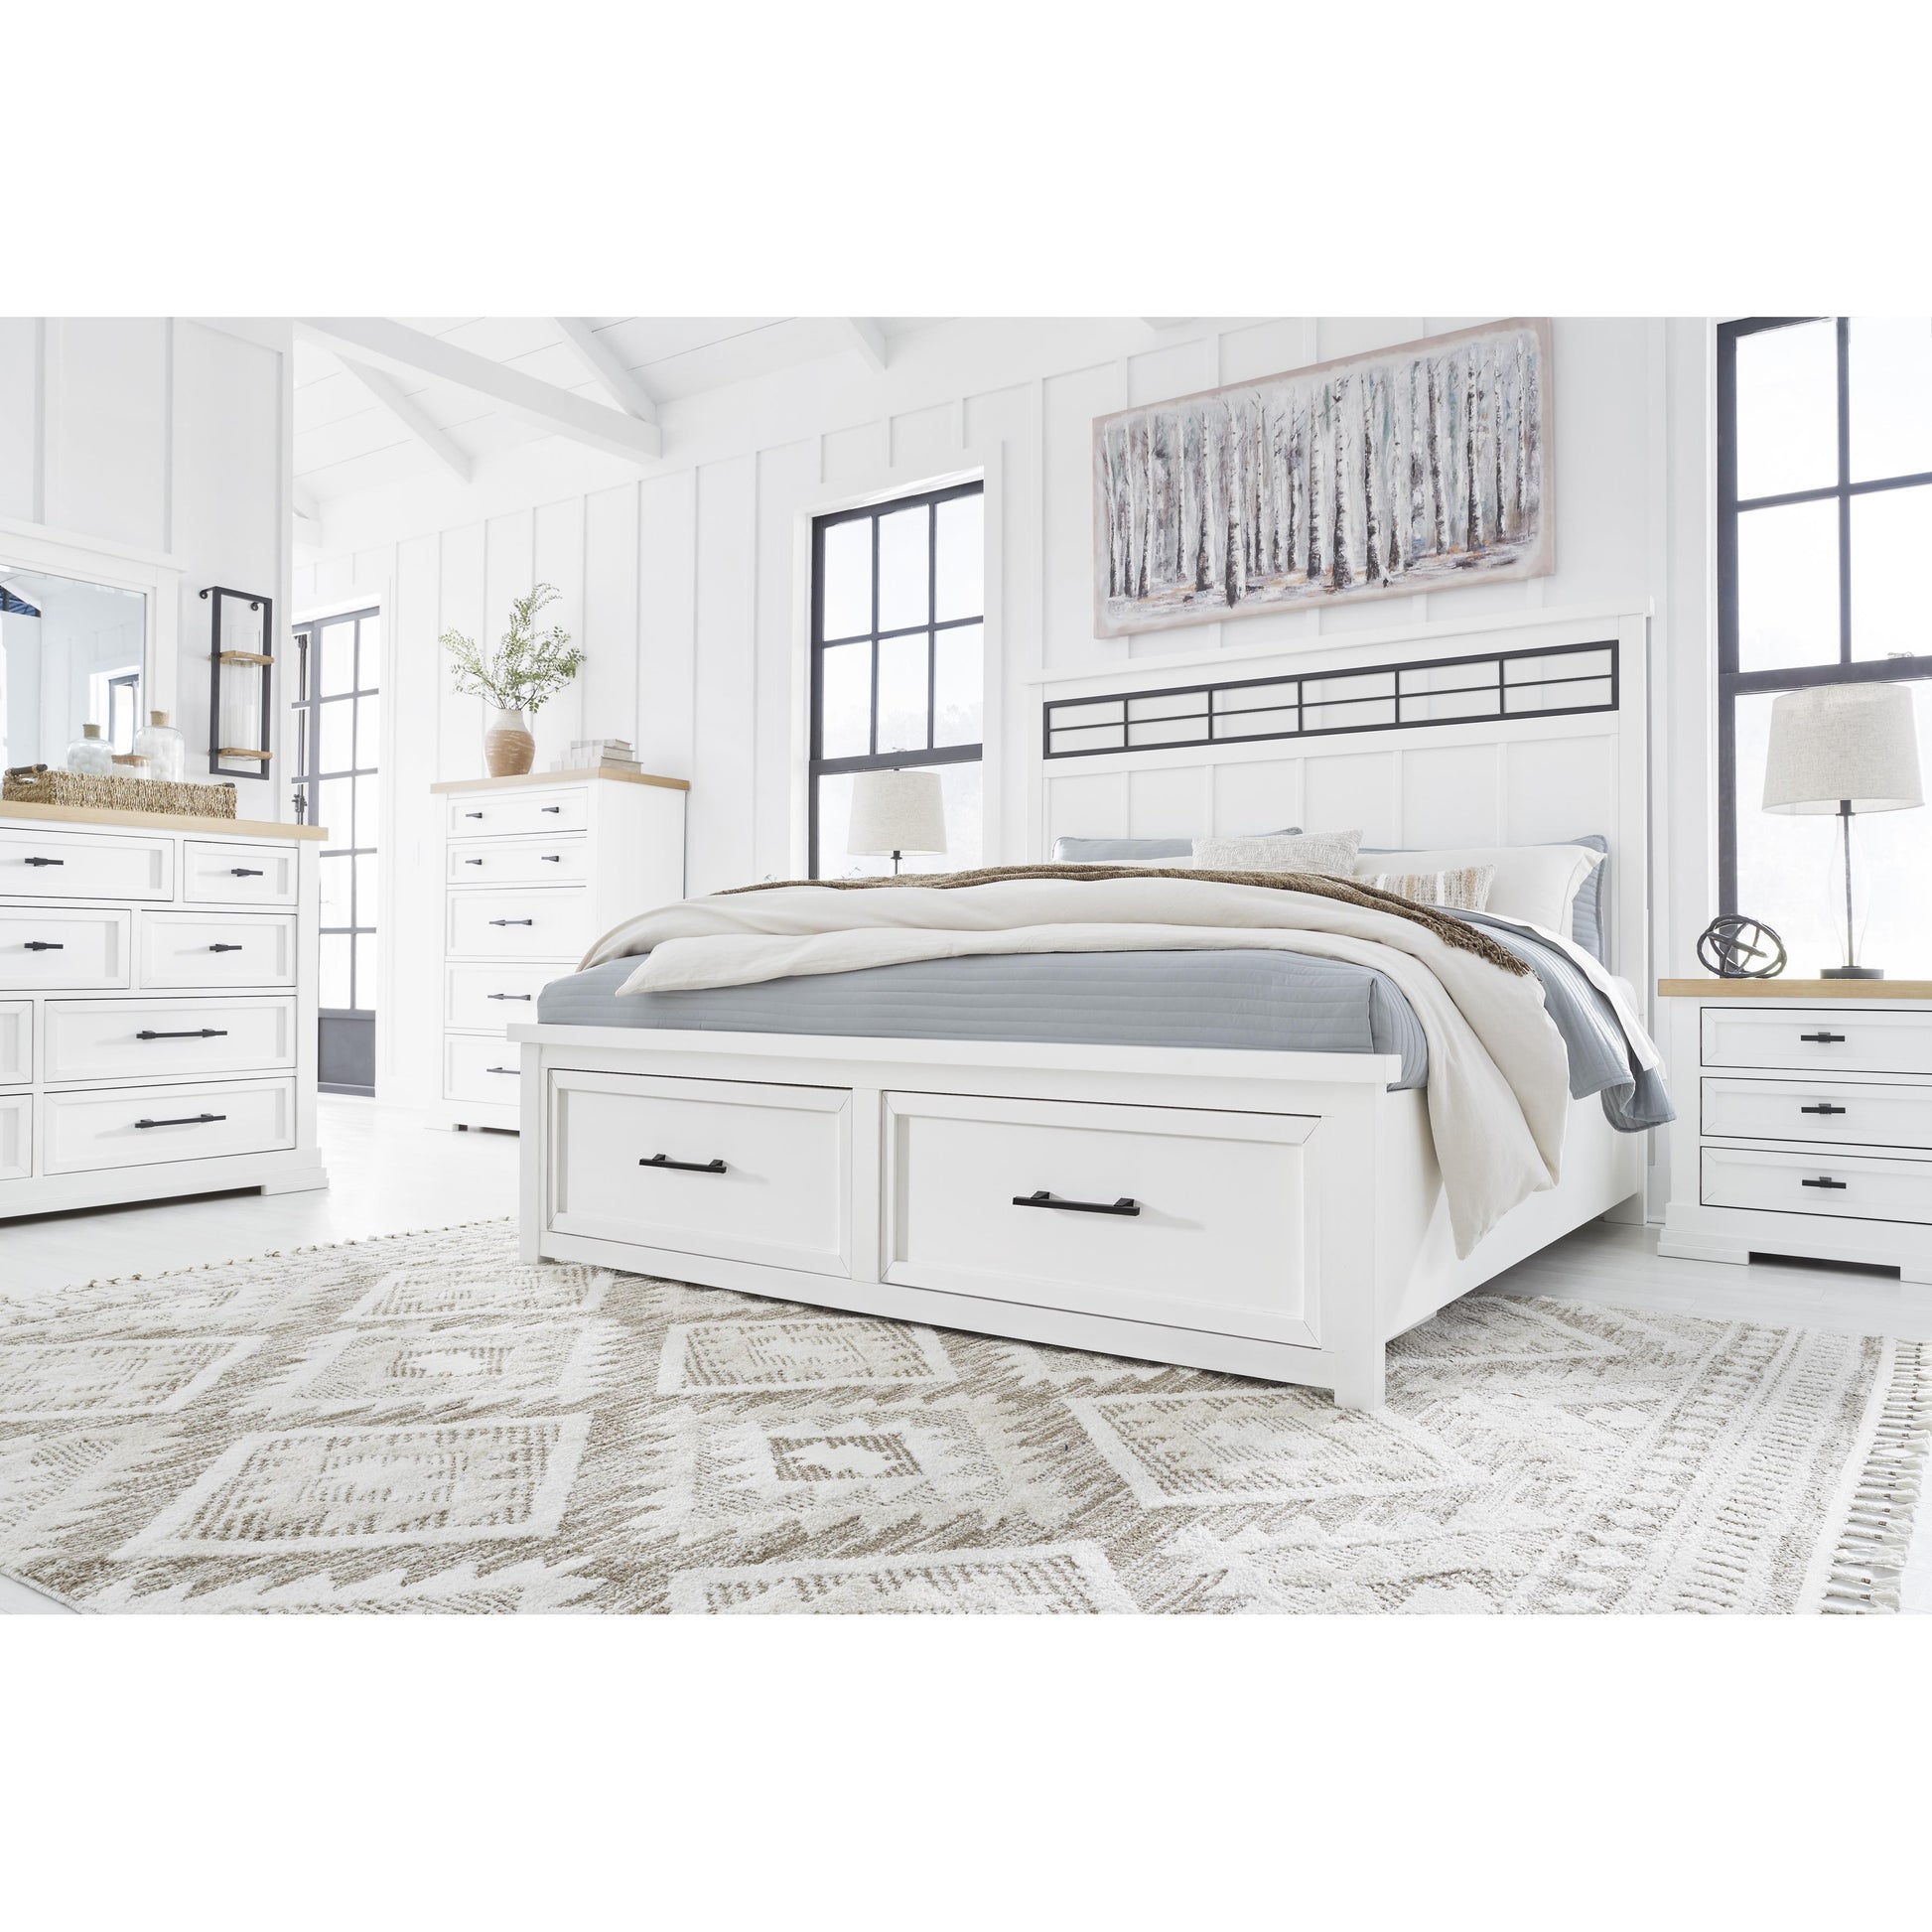 Signature Design by Ashley Ashbryn California King Panel Bed with Storage B844-58/B844-56S/B844-94 IMAGE 3